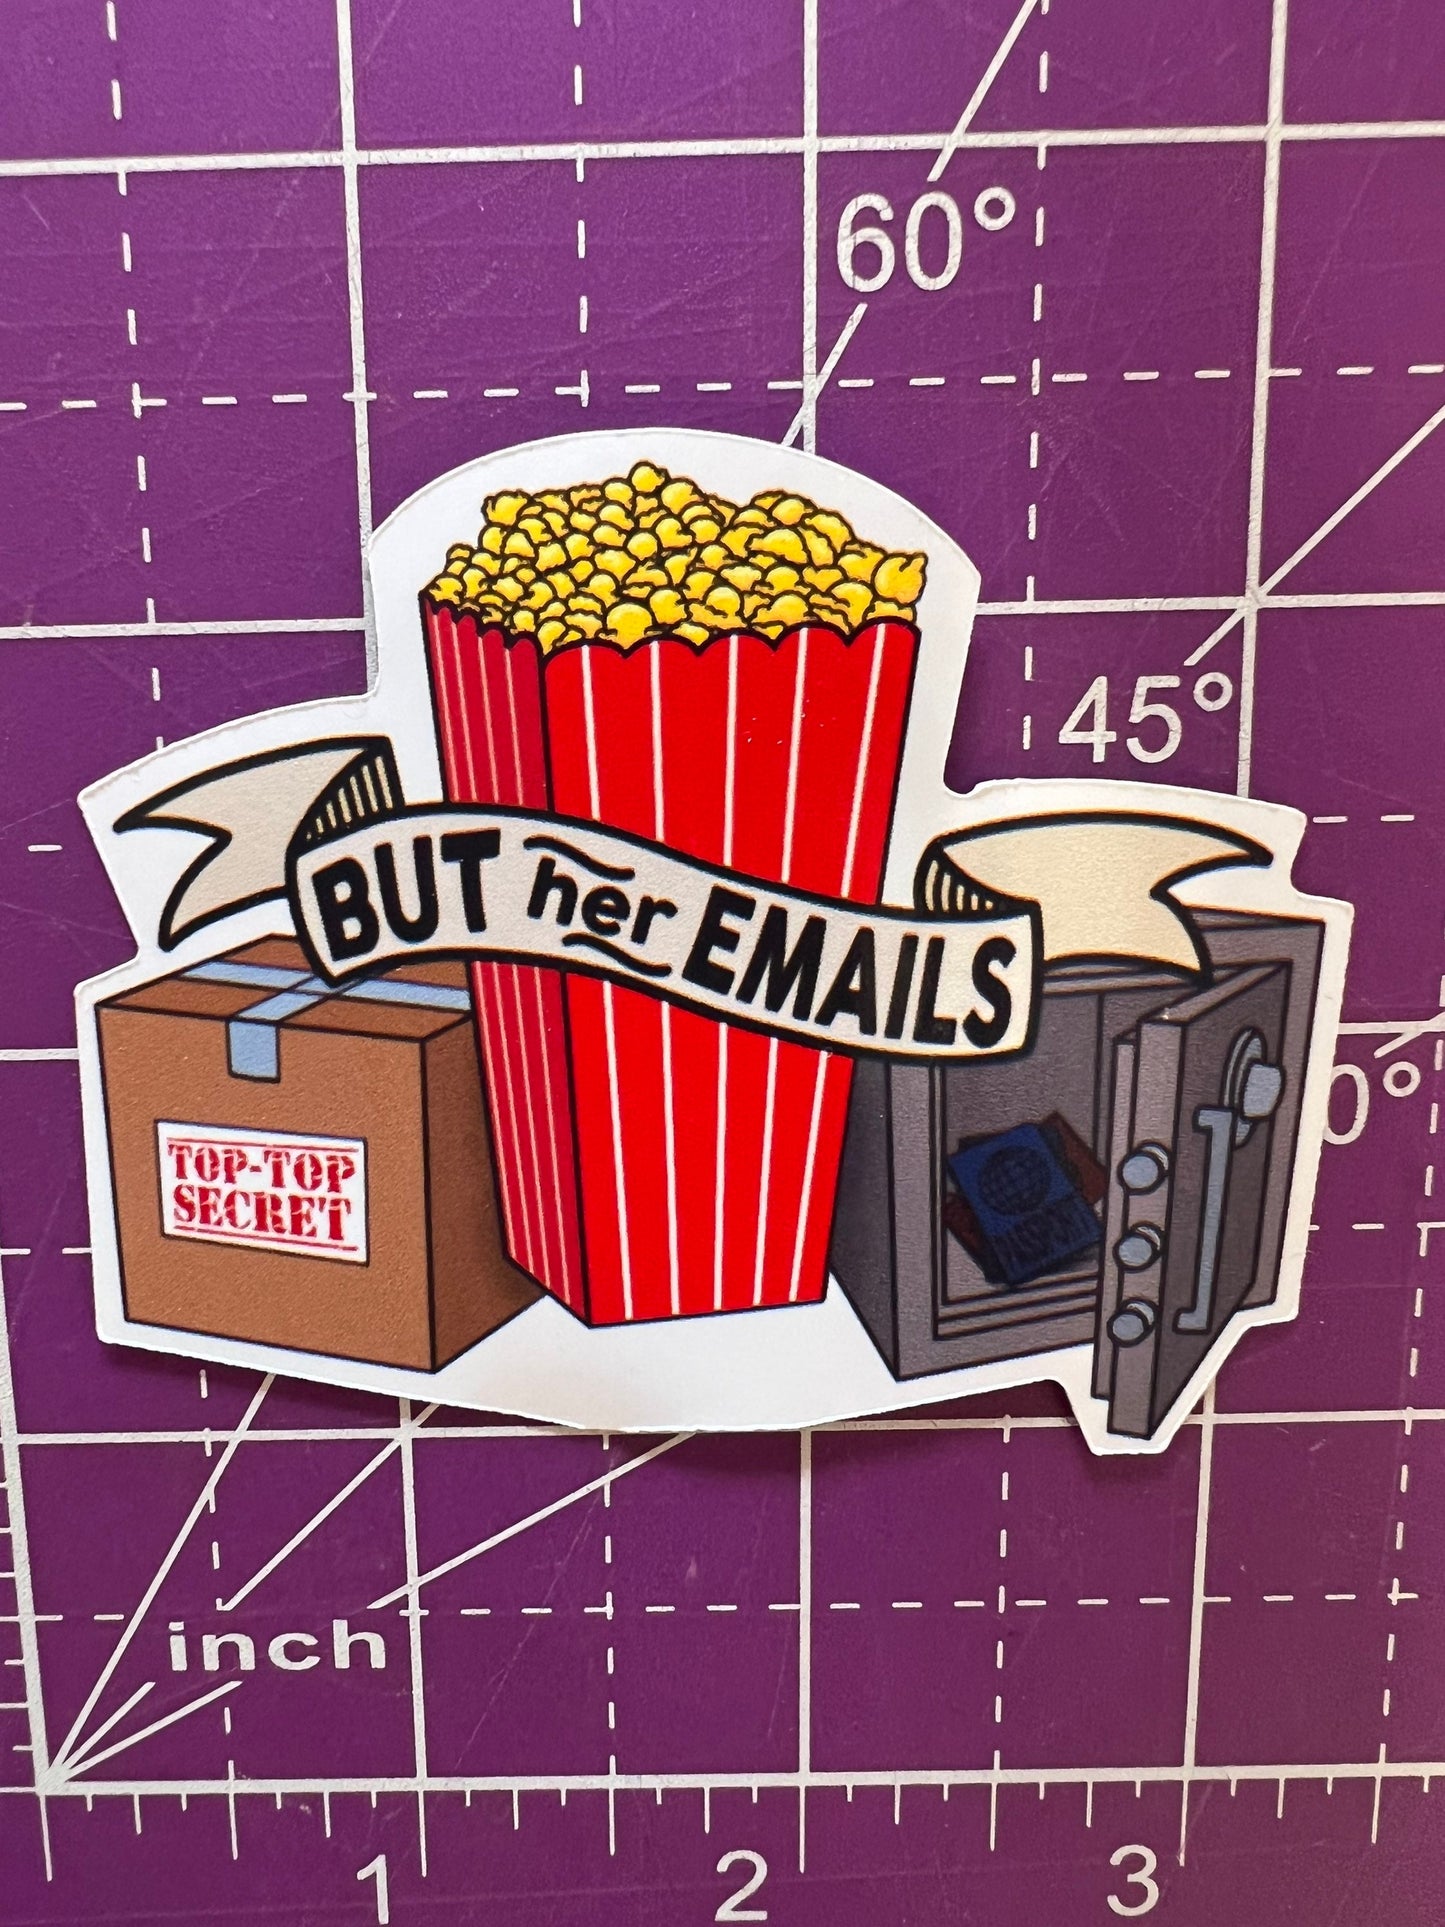 Popcorn Sticker - but her emails - trump for prison - and more options!